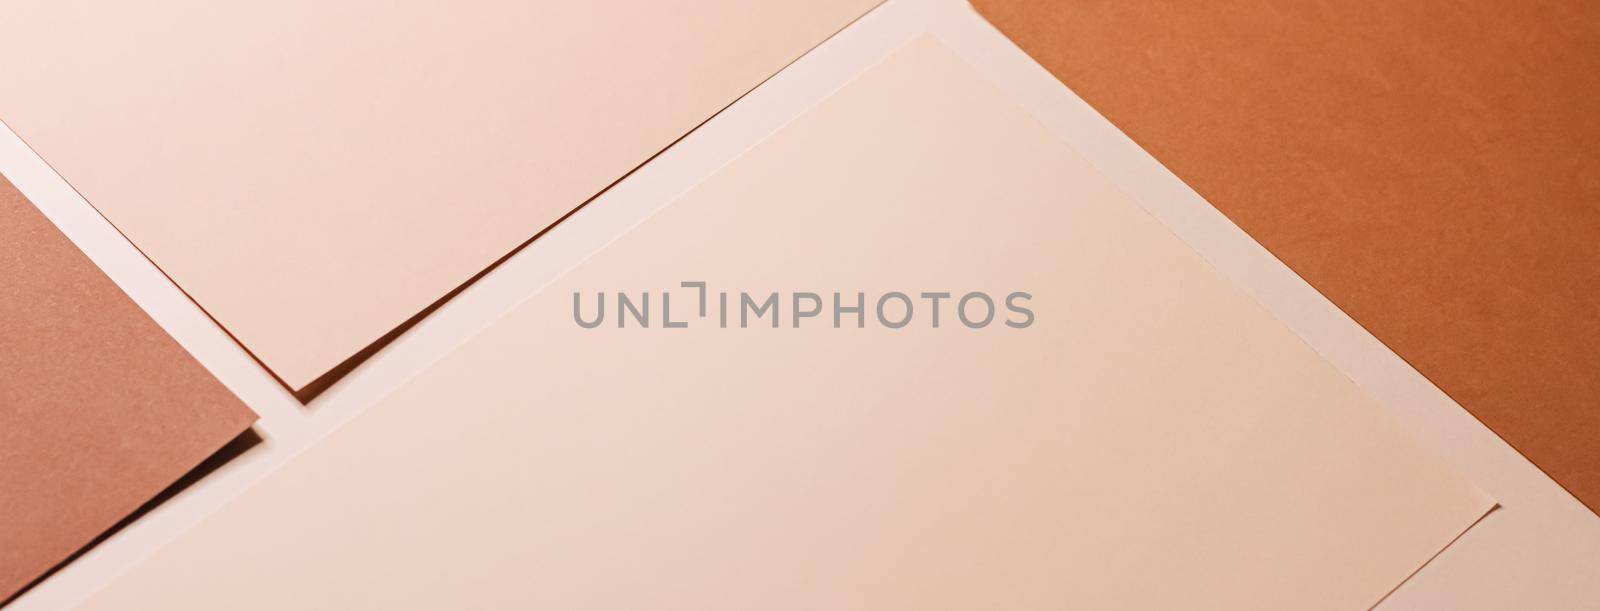 Beige and brown A4 papers as office stationery flatlay, luxury branding flat lay and brand identity design for mockups